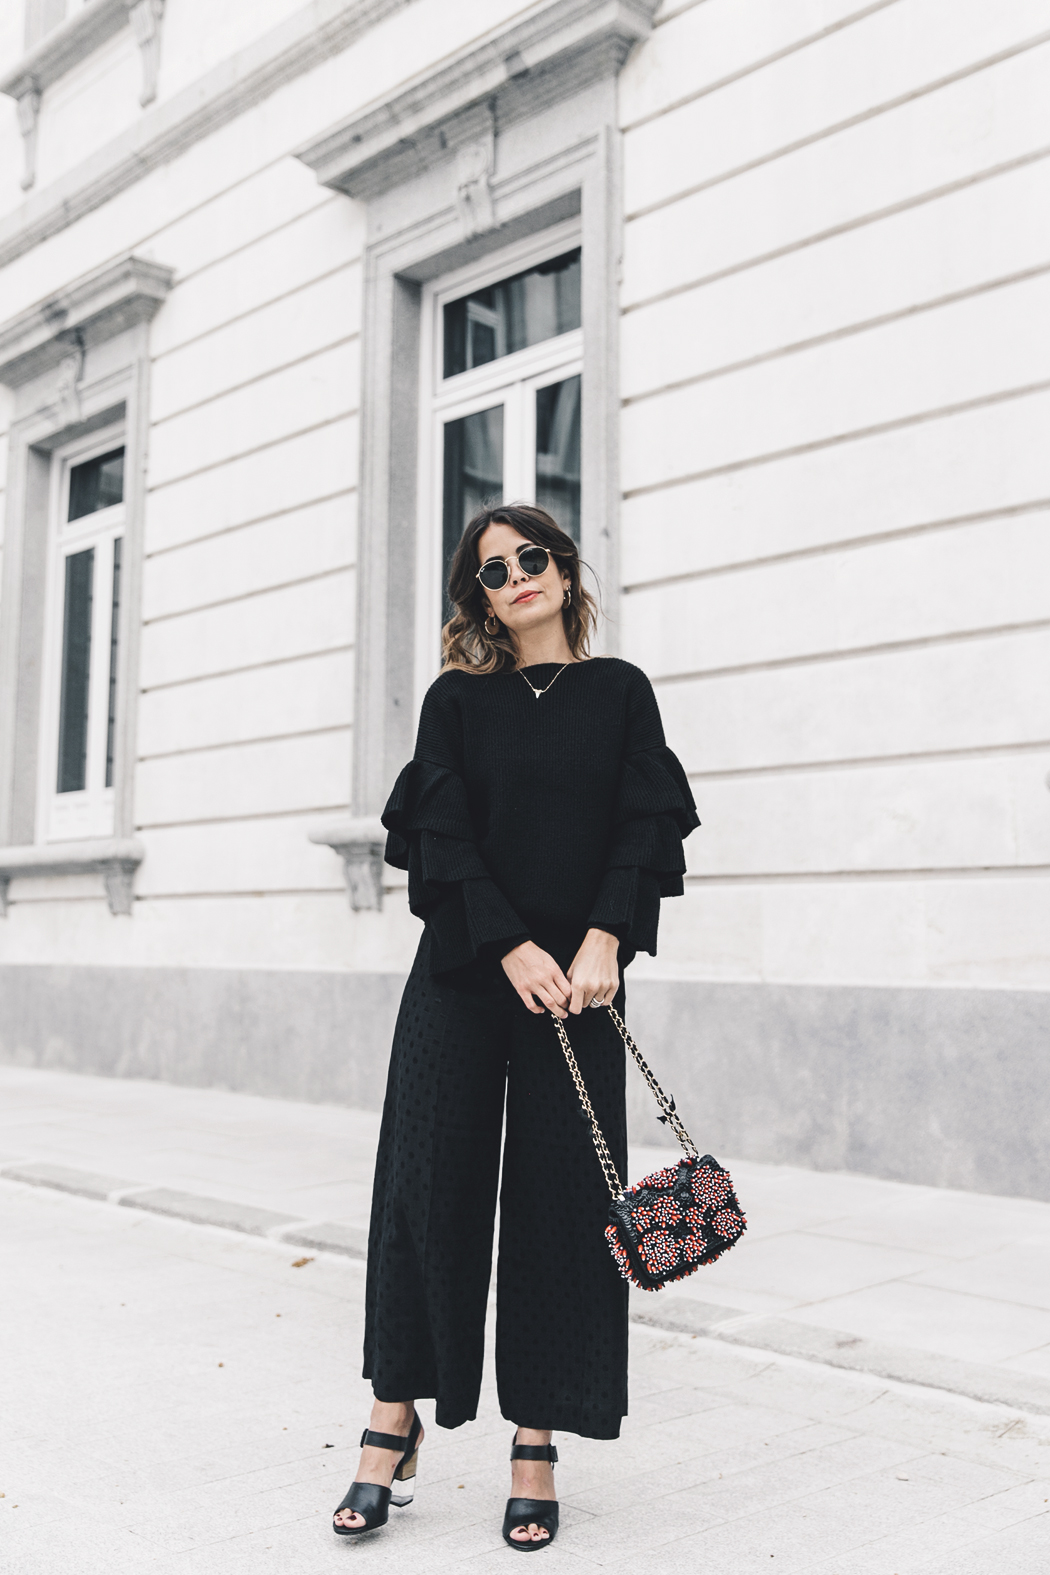 Ruffled_Sleeves_Jumper-Black_Culottes-Dune_Sandals-Beaded_Bag-Outfit-Collage_Vintage-Street_Style-12